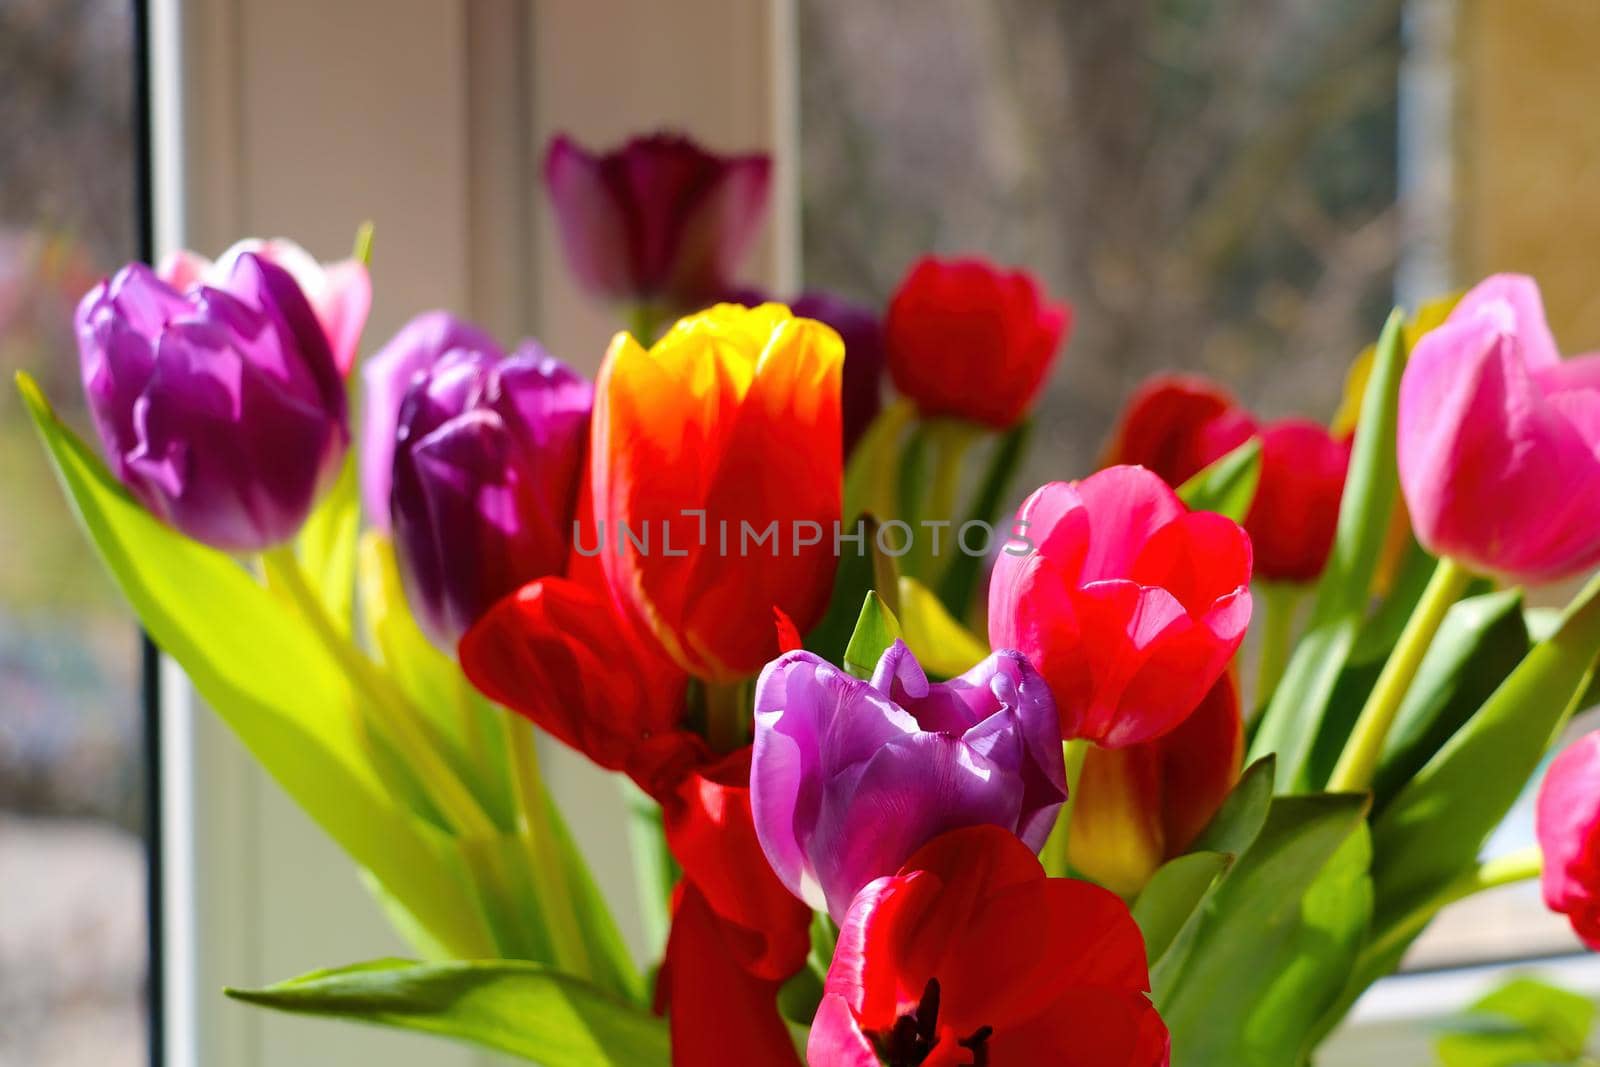 There is a bouquet of fragrant blooming tulips in a vase on the windowsill